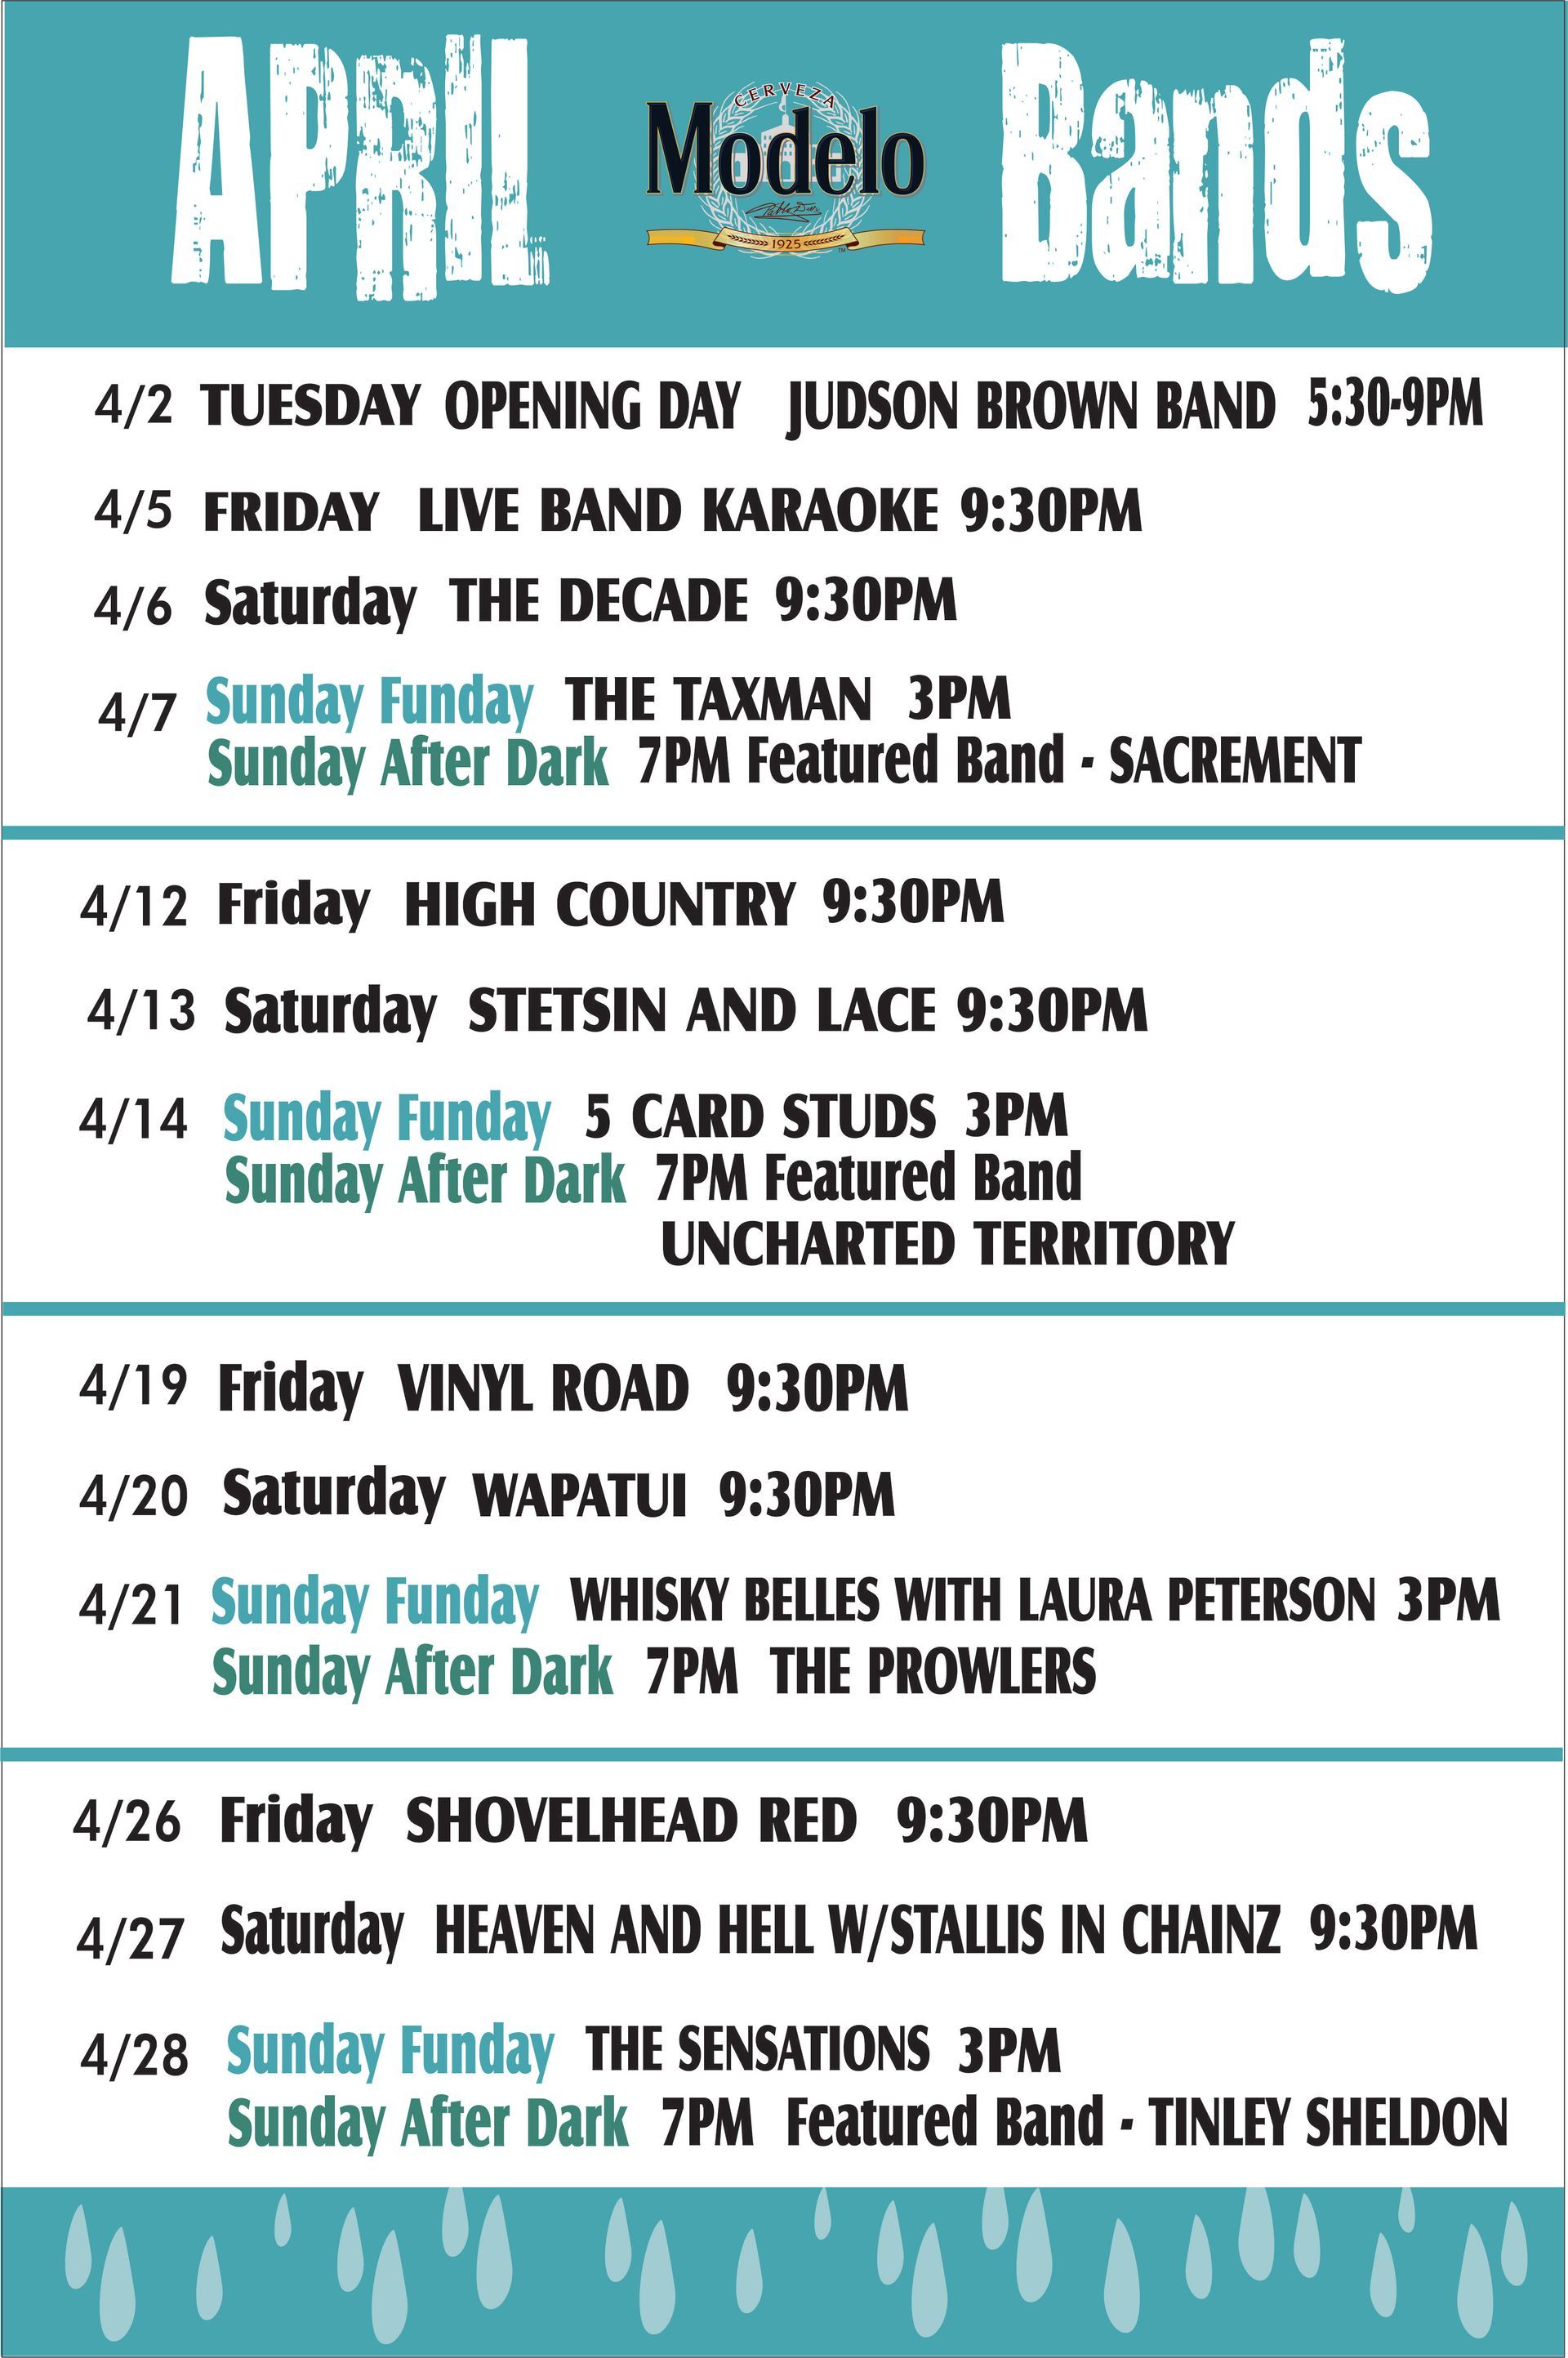 A poster for april modelo bands shows a schedule of events.